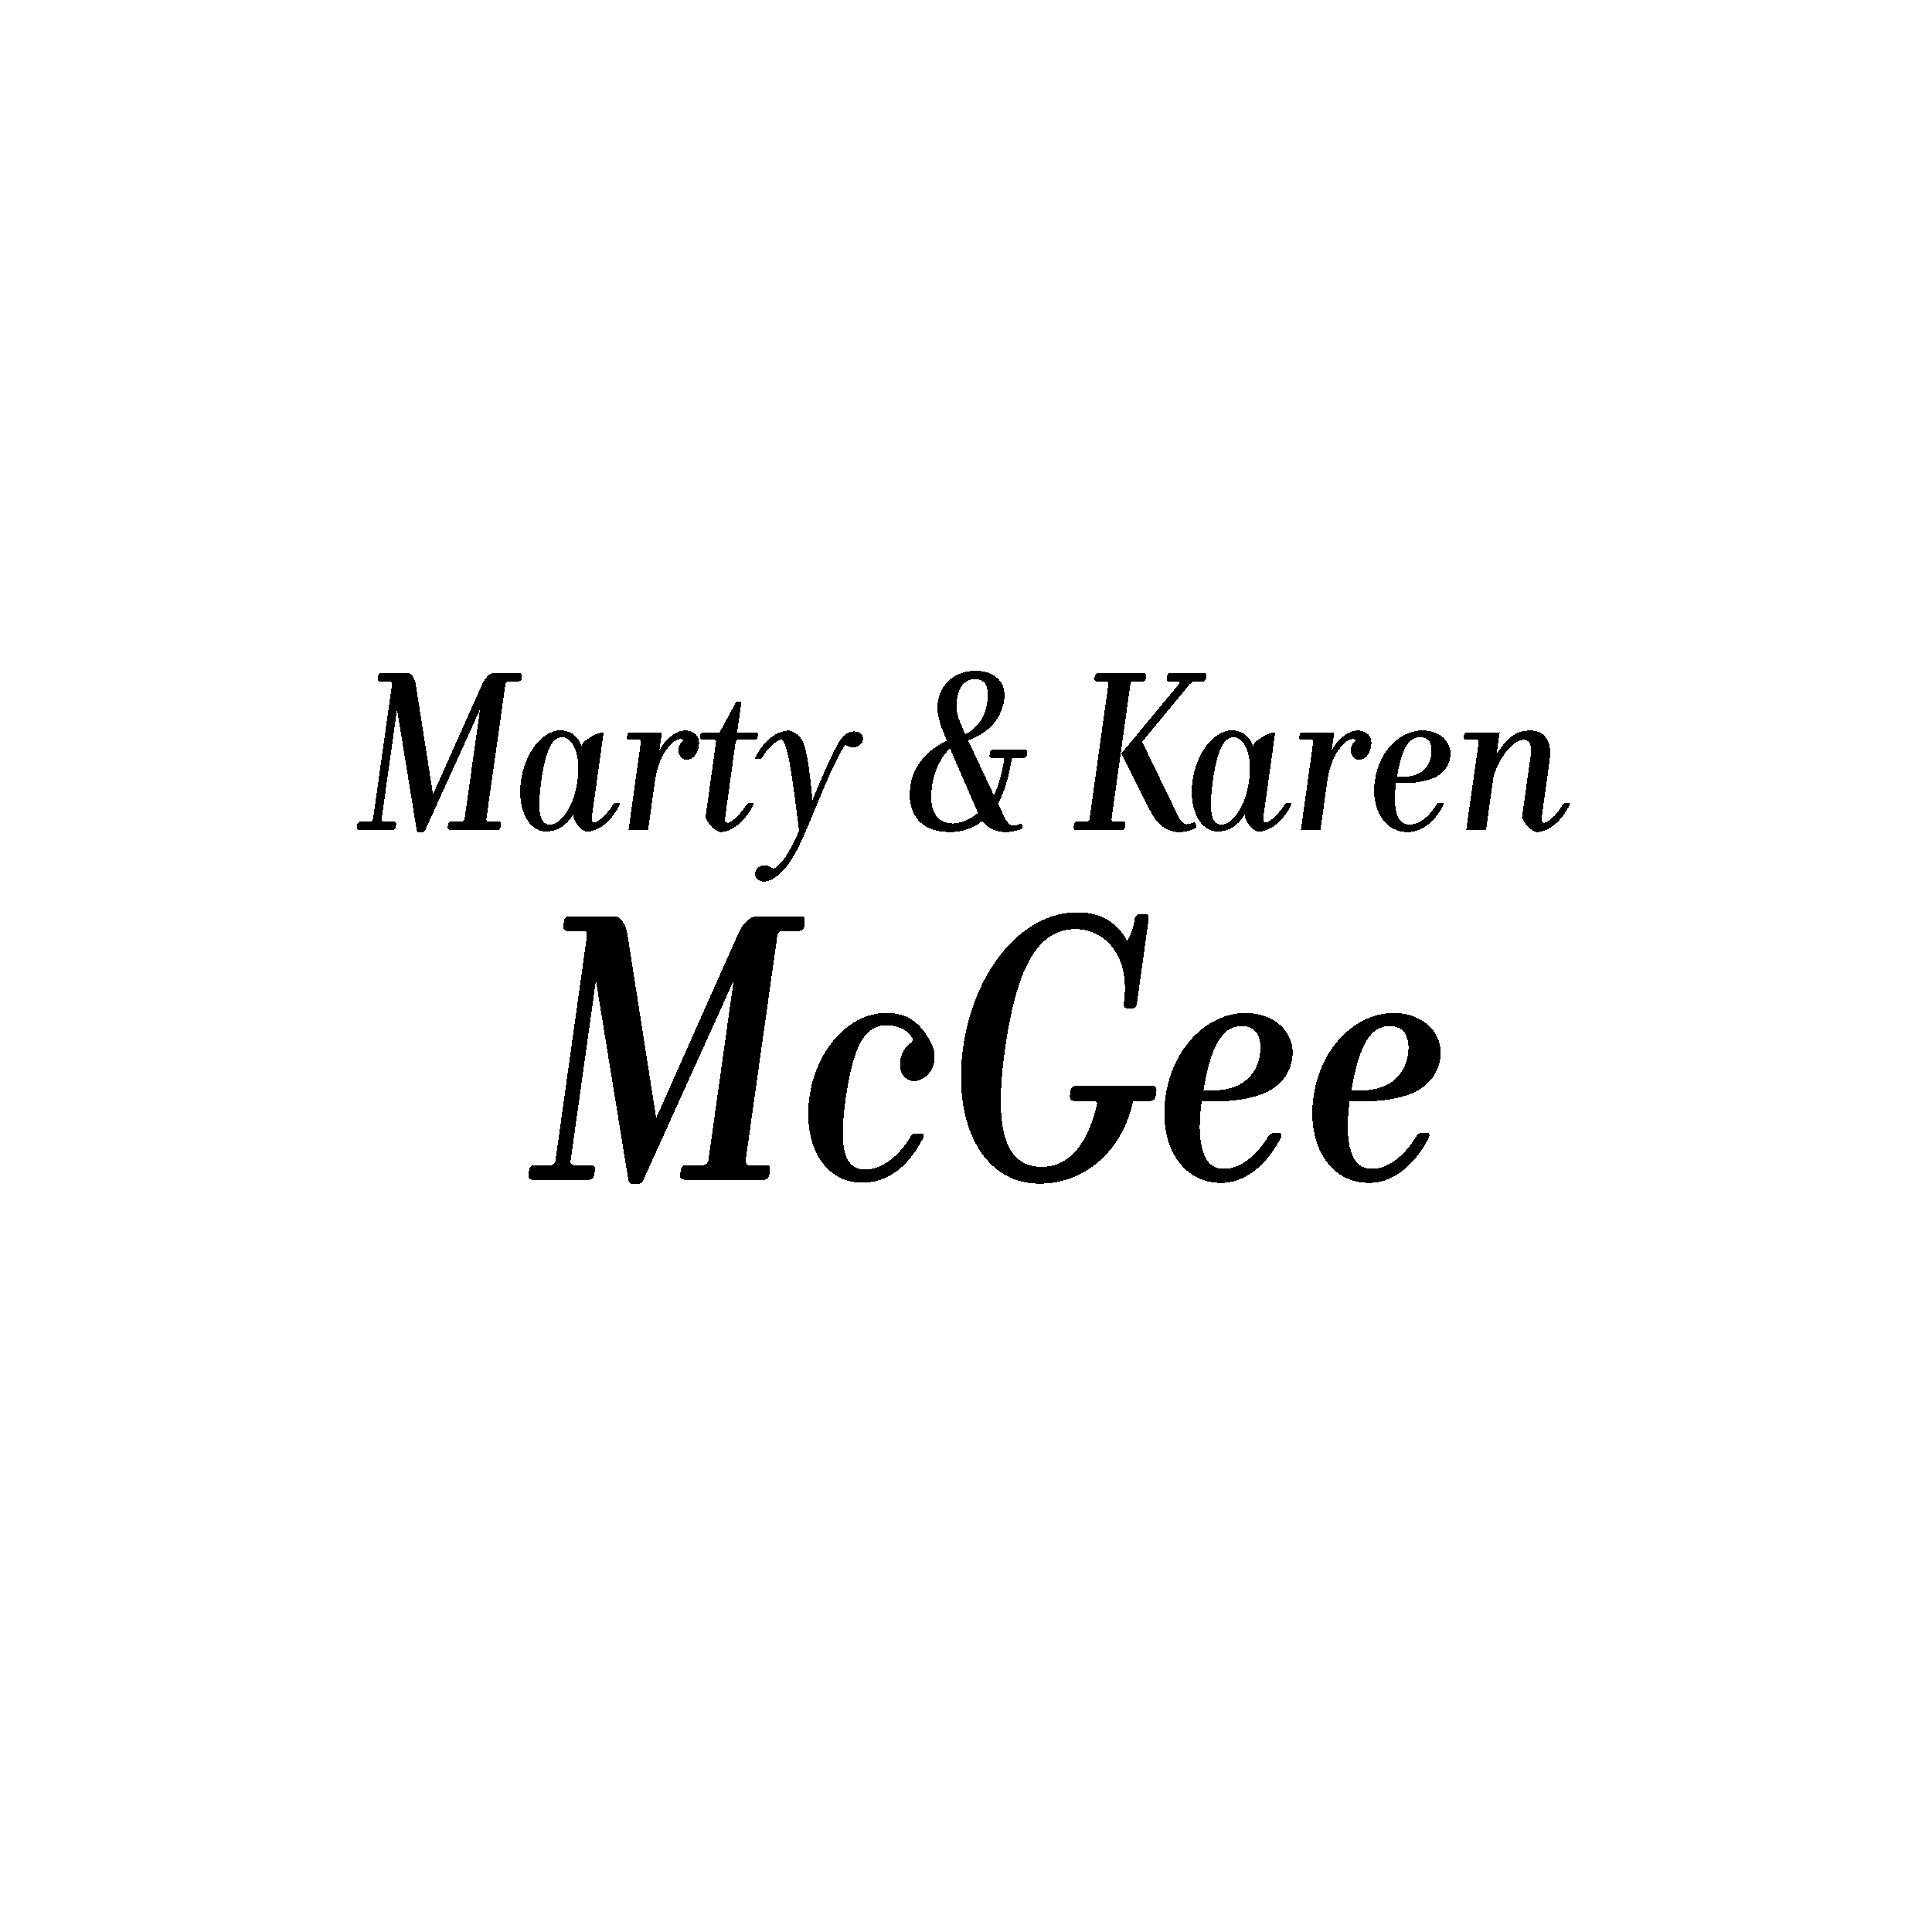 Marty and Karen McGee